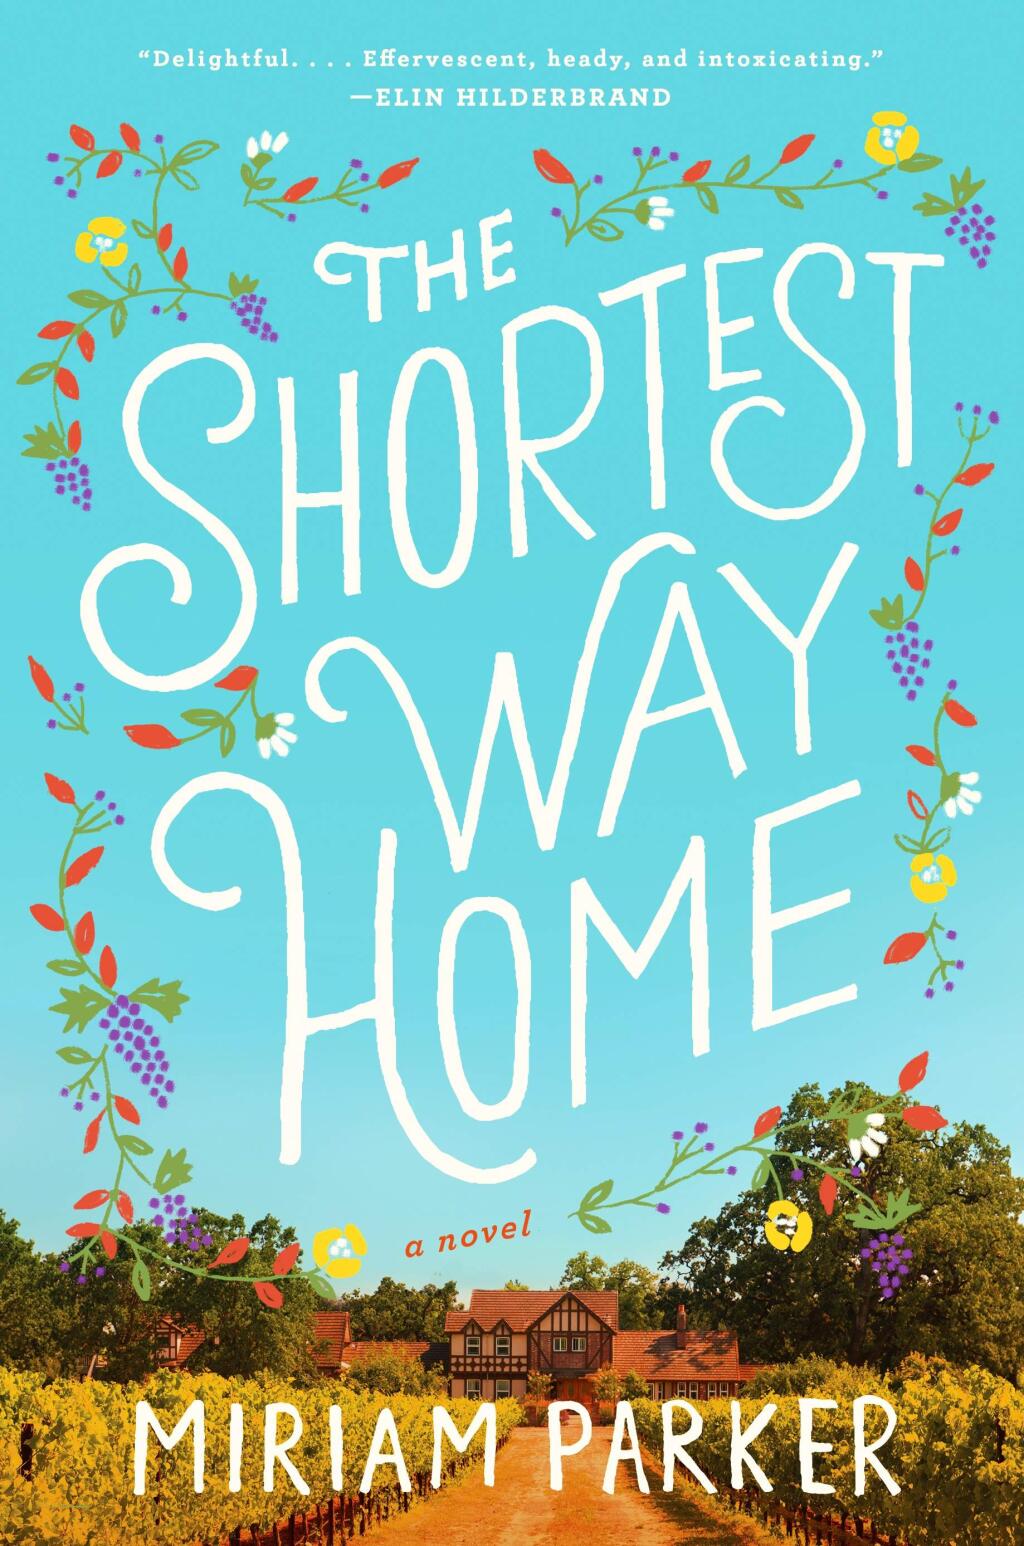 'The Shortest Way Home' is set entirely in Sonoma Valley.